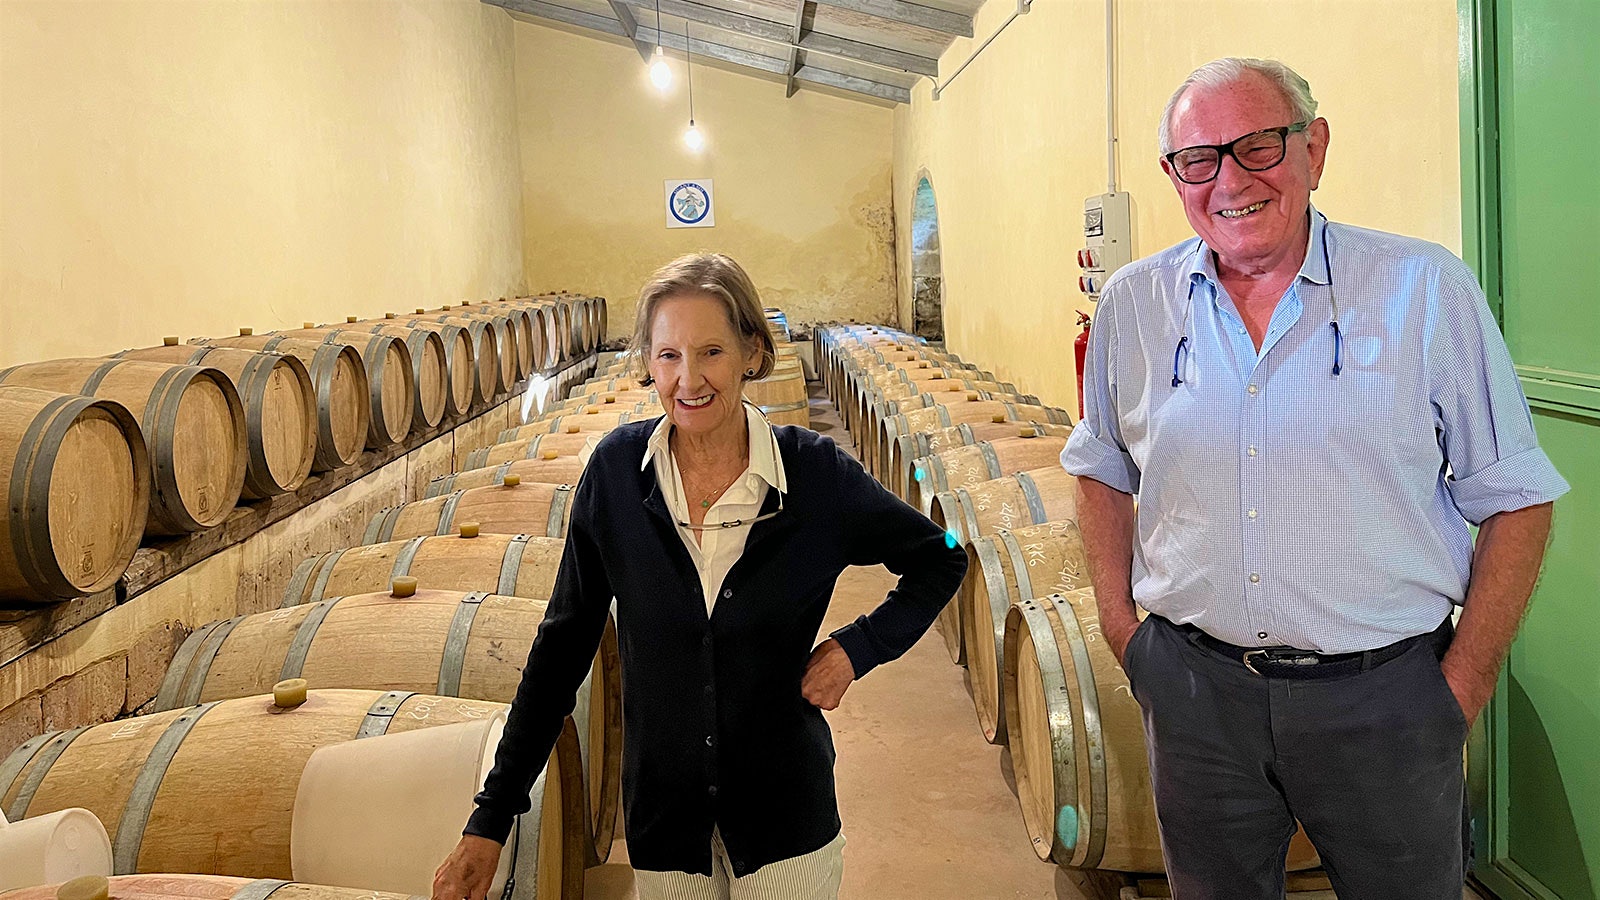  Peter Vinding-Diers and his wife, Susie, stand in the small barrel room of Vinding Montecarrubo